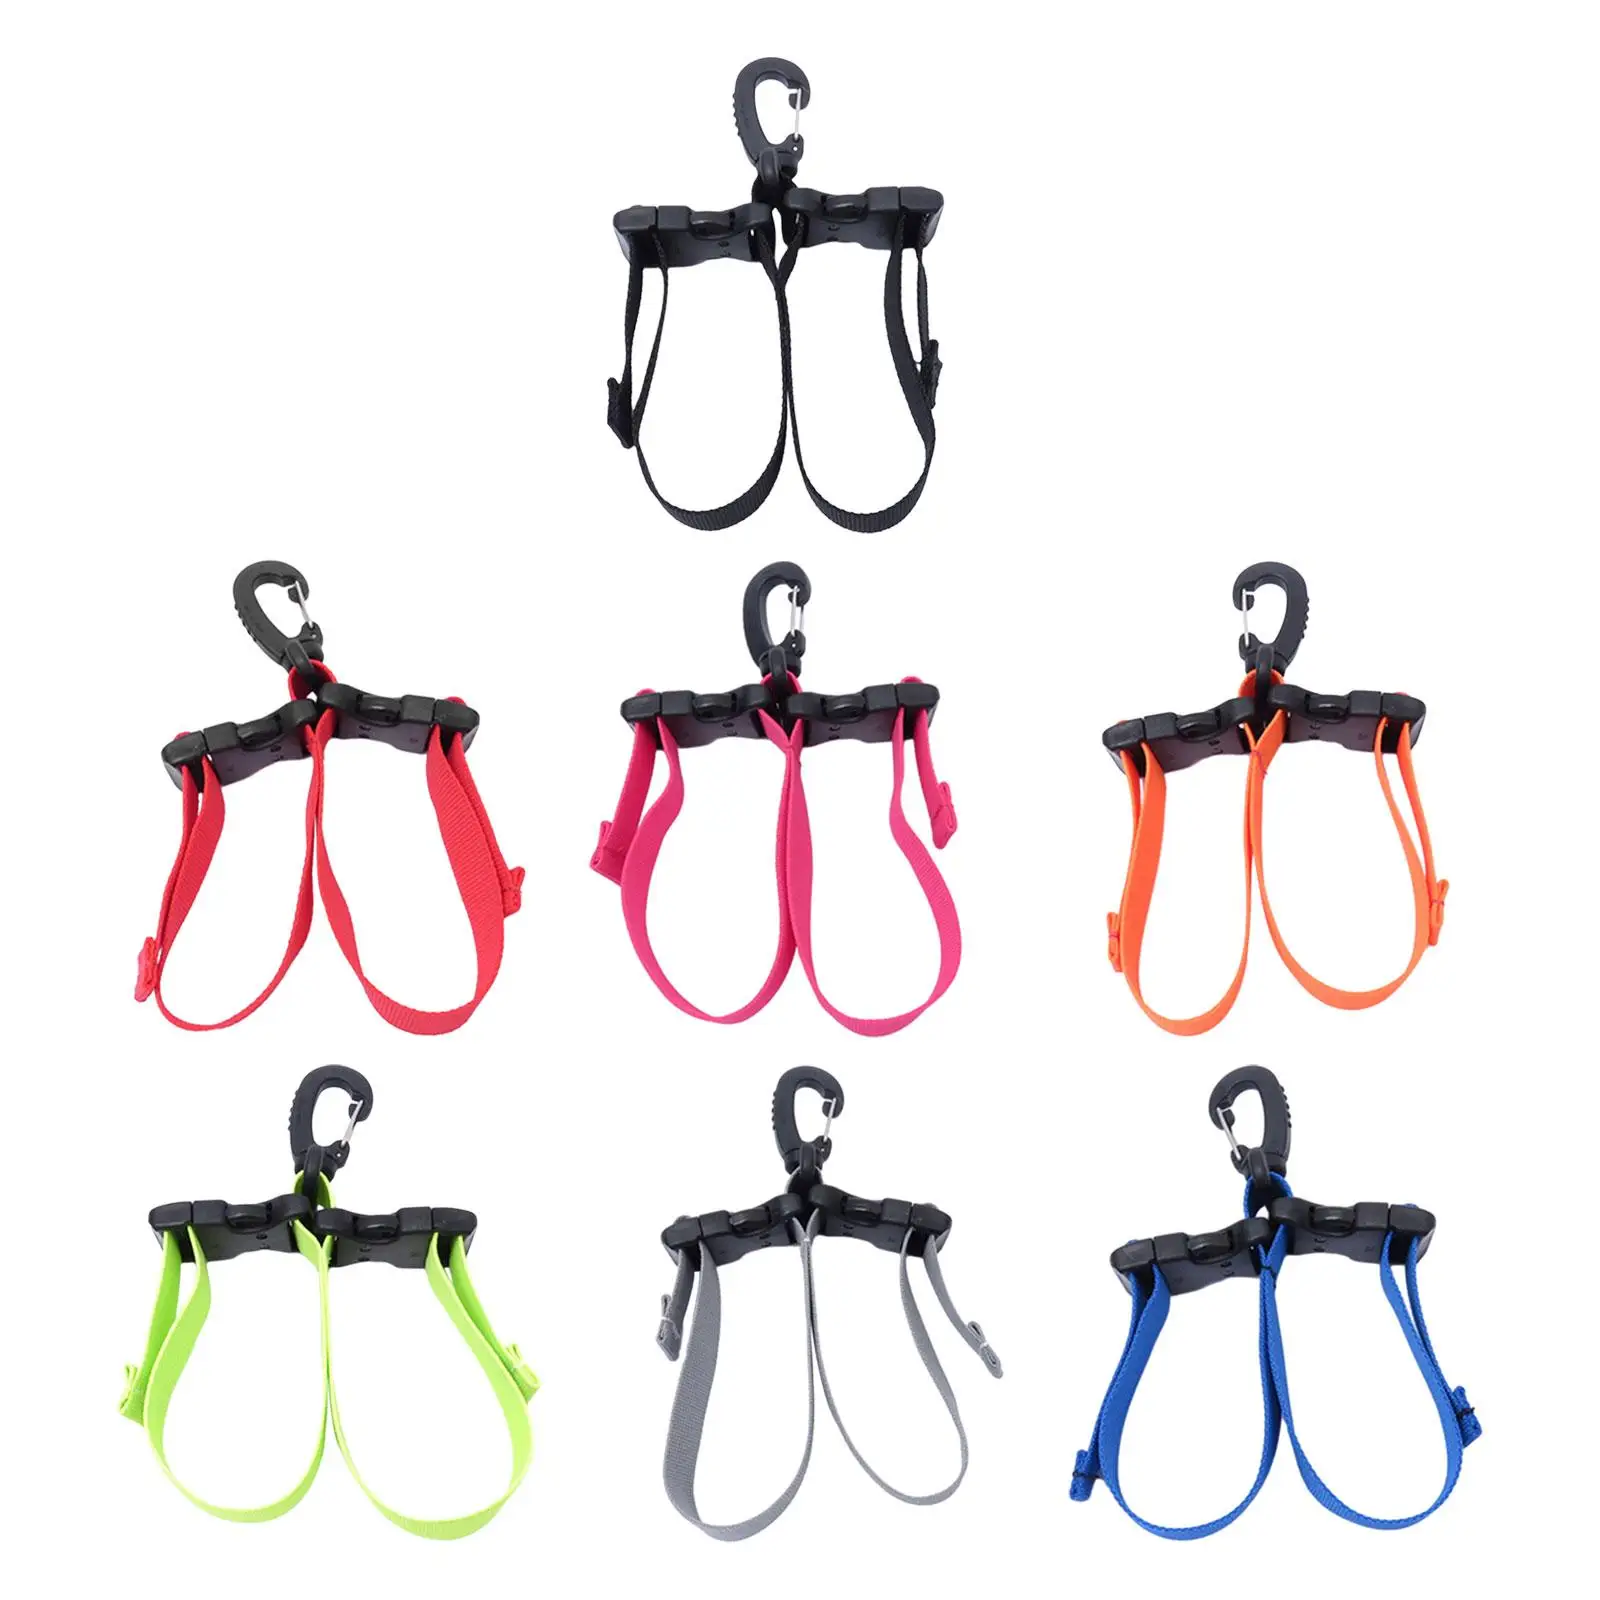 Diving Fins Strap Adjustable Universal Hanging Buckles Double Buckles Scuba Fins Strap Quick Release Buckles for Swimming Adult